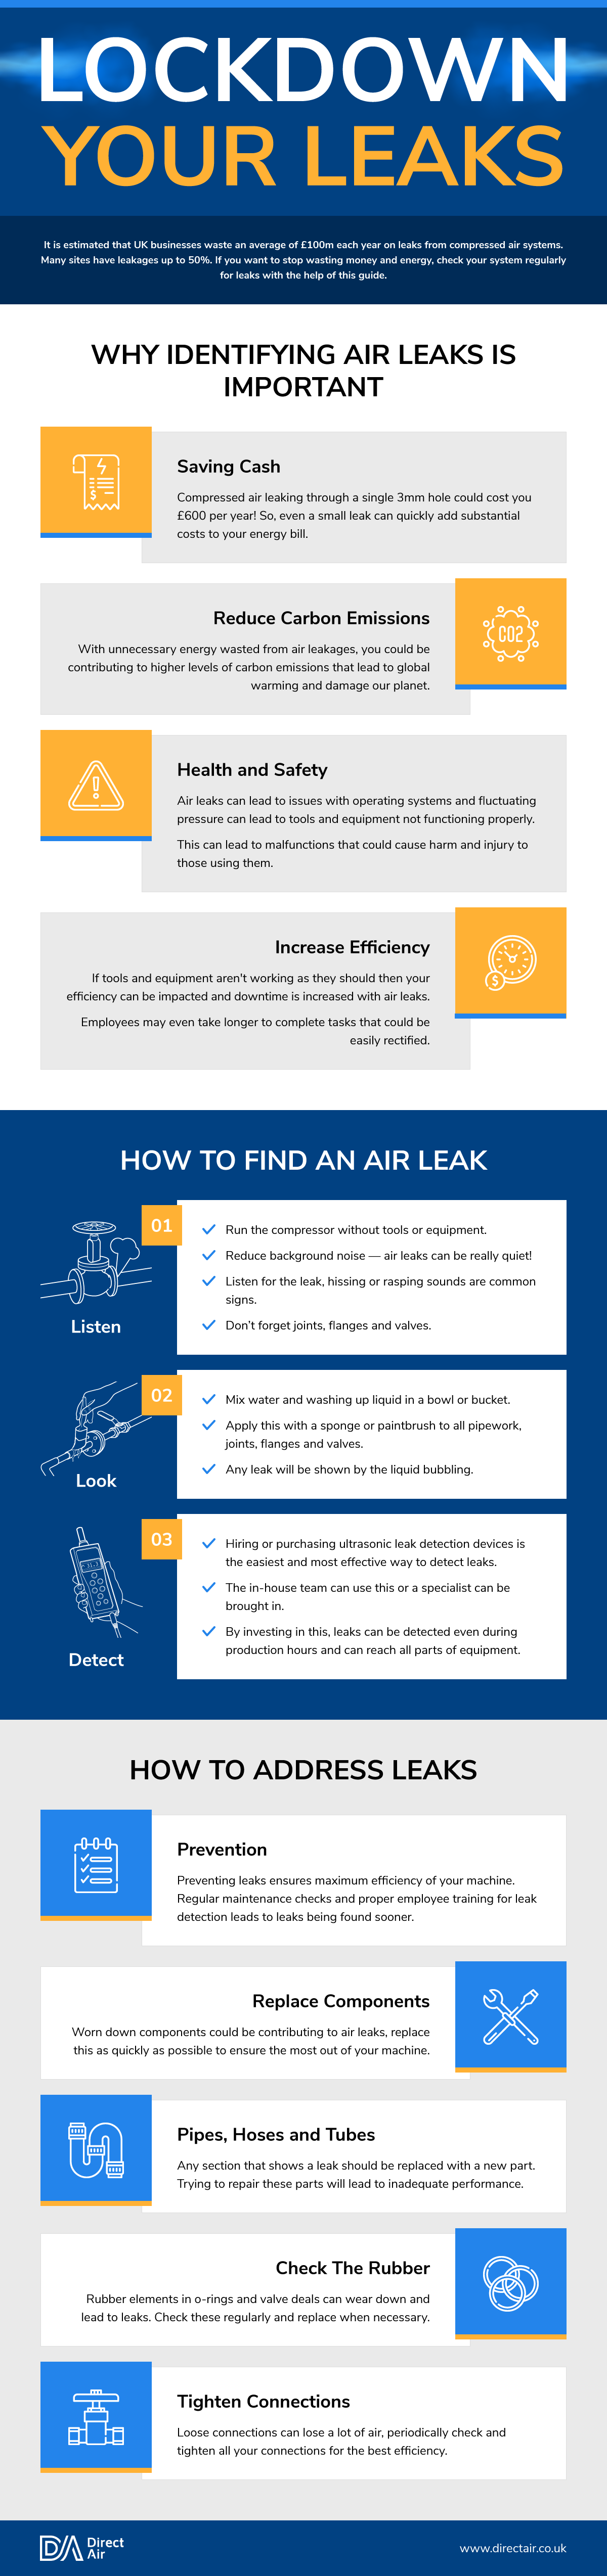 Air Leaks cost UK business £100m every year